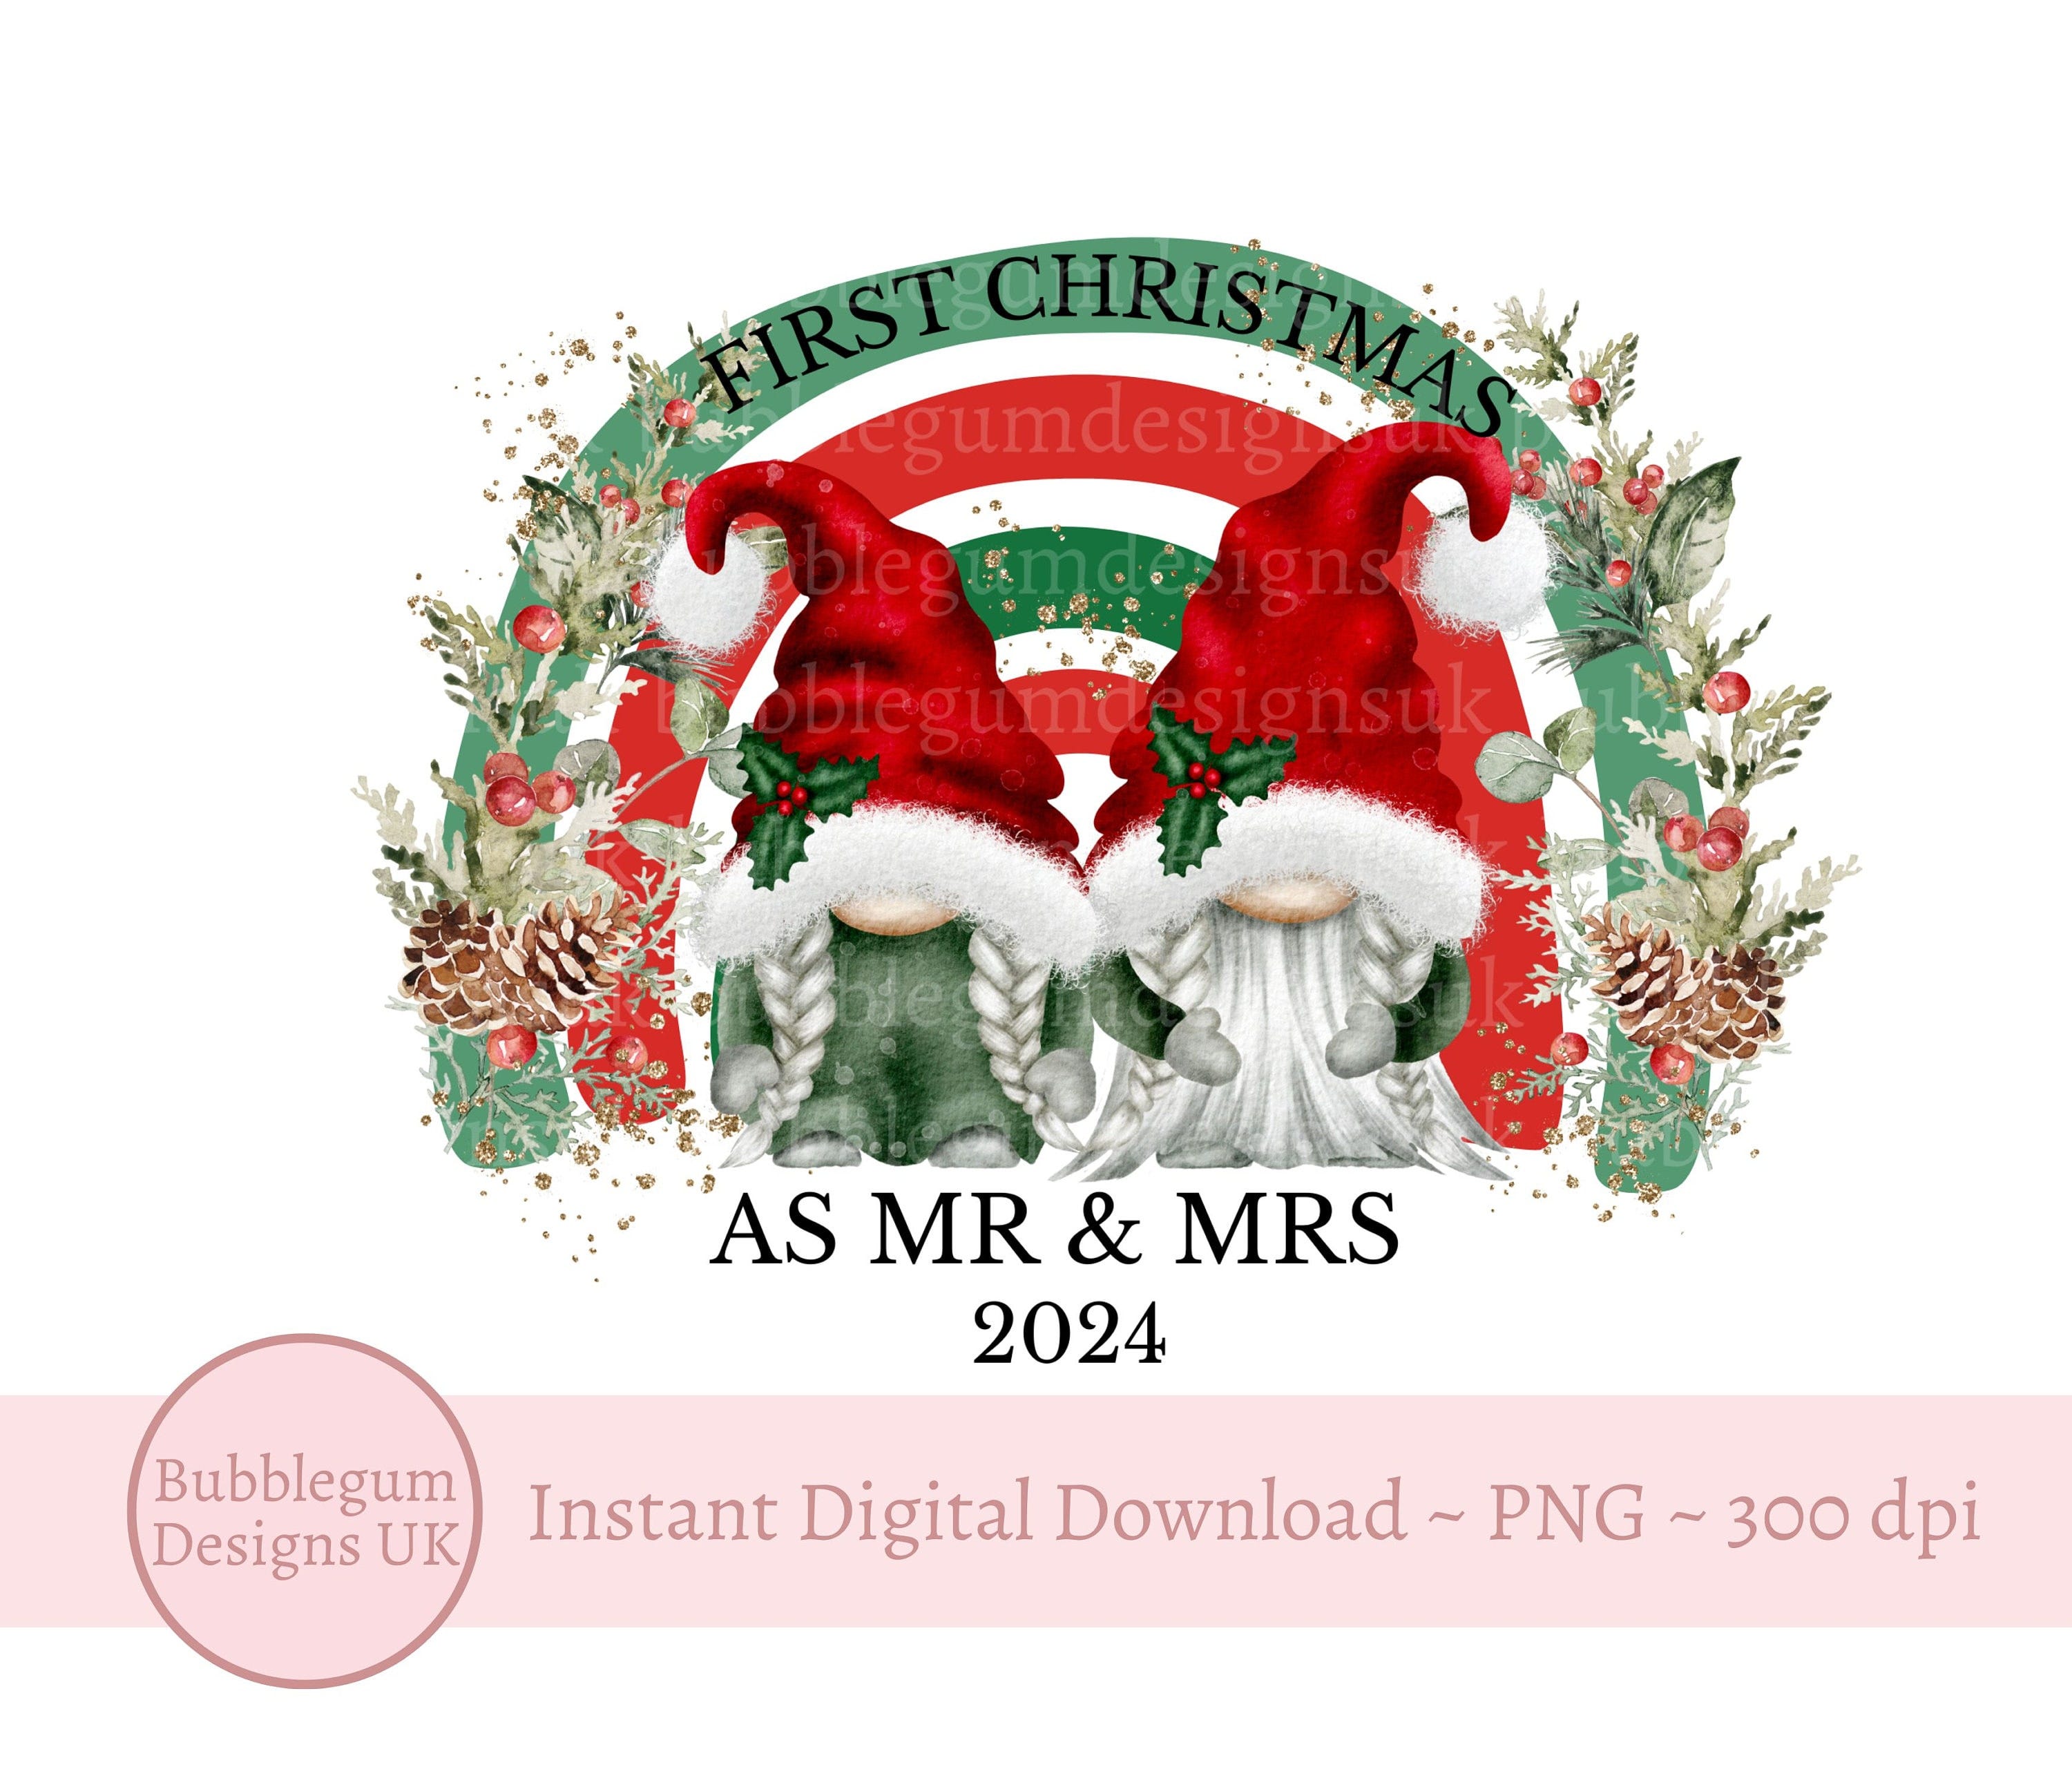 First Christmas As Mr & Mrs Gnomes 2024 PNG, Couple First Christmas, Gnome Rainbow, Ornament Sublimation Design, Instant Digital Download